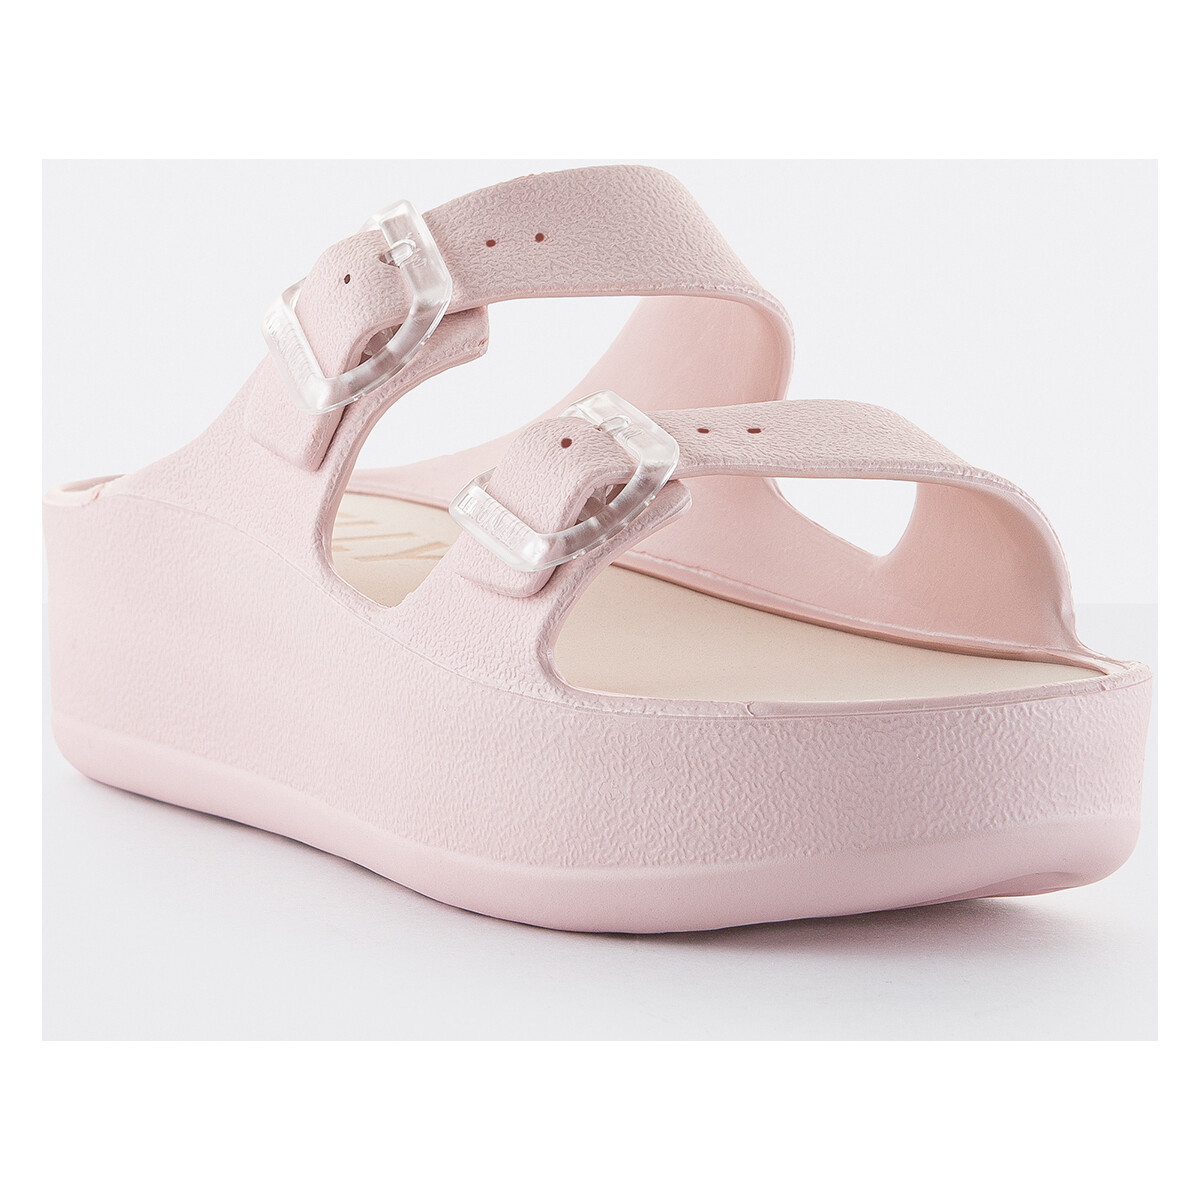 Chaussures Femme The home deco fa FENIX 05 Rose